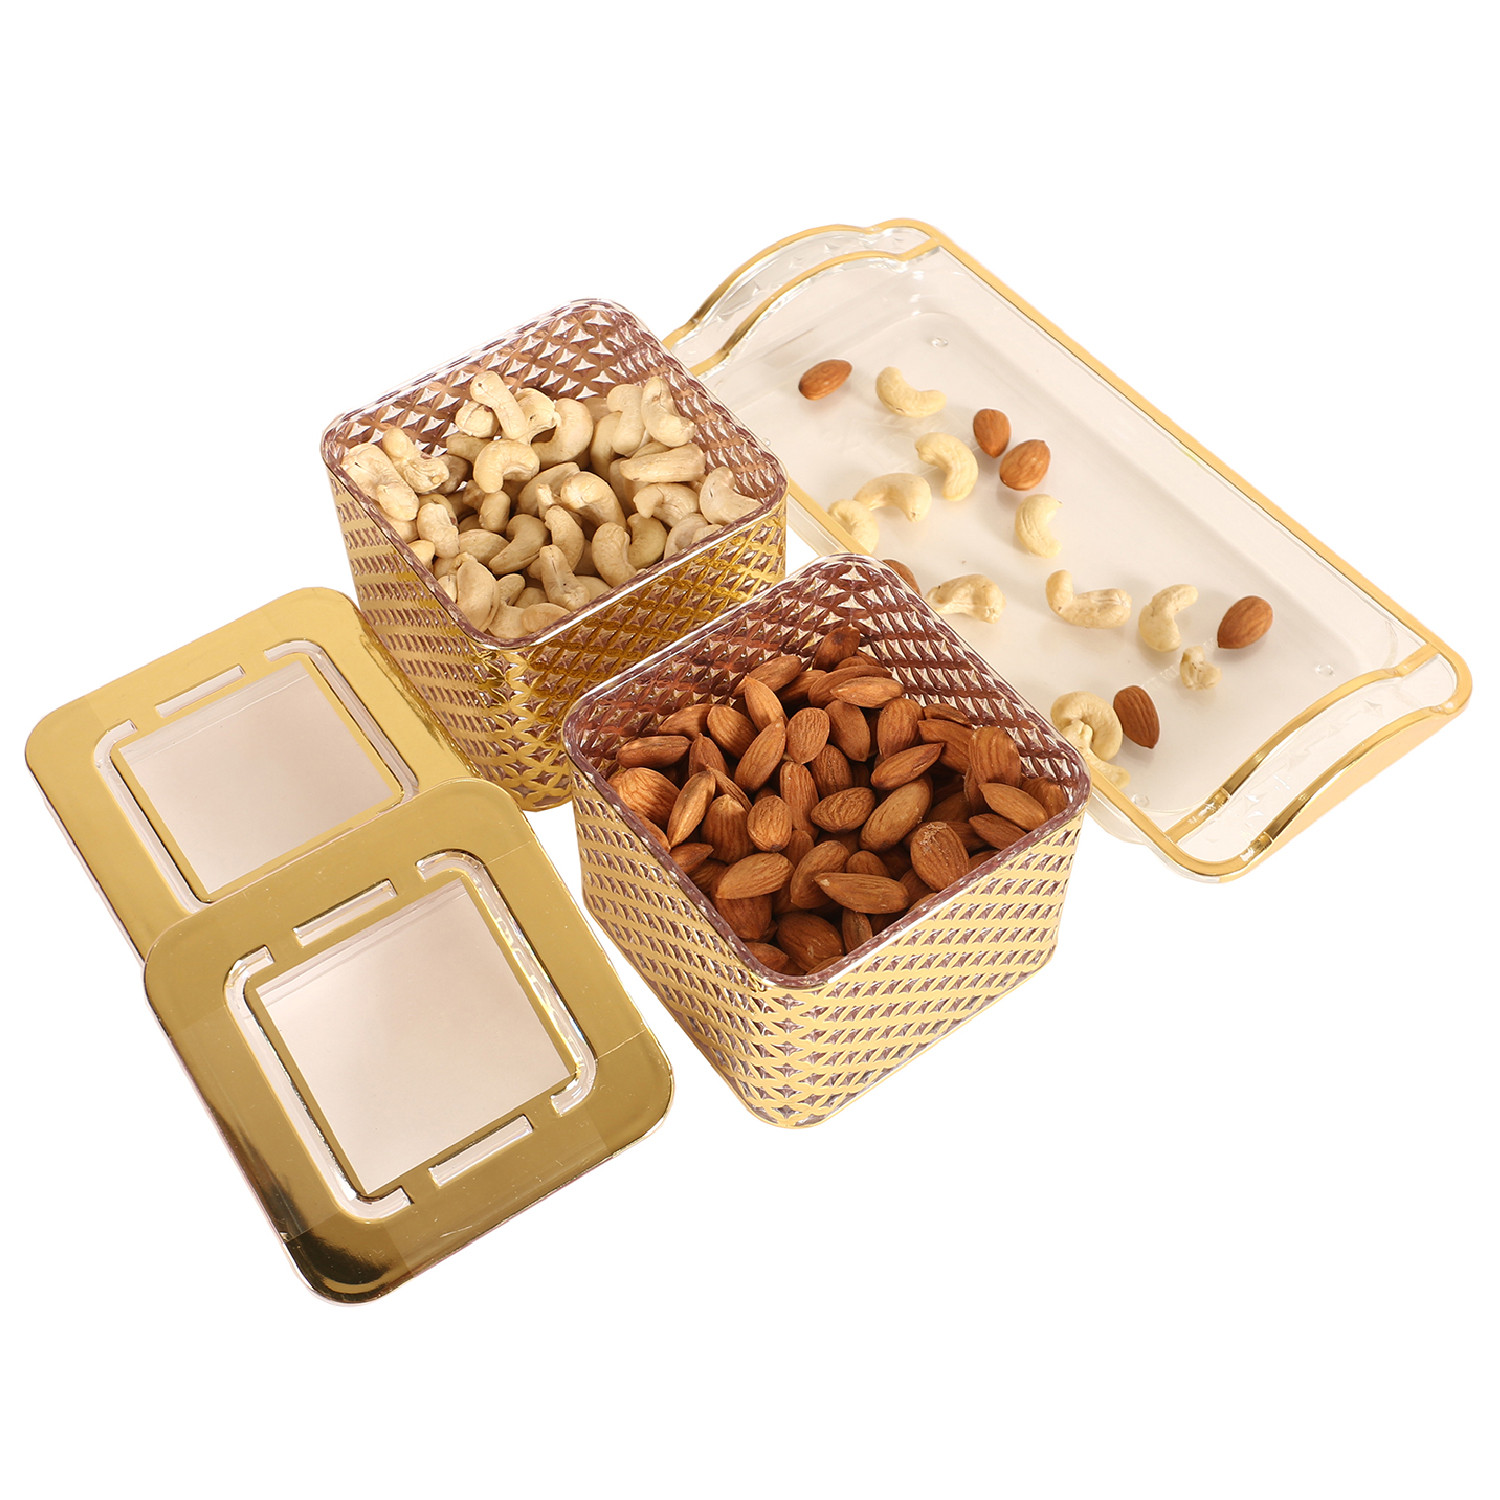 Kuber Industries 2 Containers & Tray Set|Unbreakable Gold Plated Plastic Snackers,Cookies,Nuts Serving Tray|Airtight Containers with Lid,400 ml (Gold)